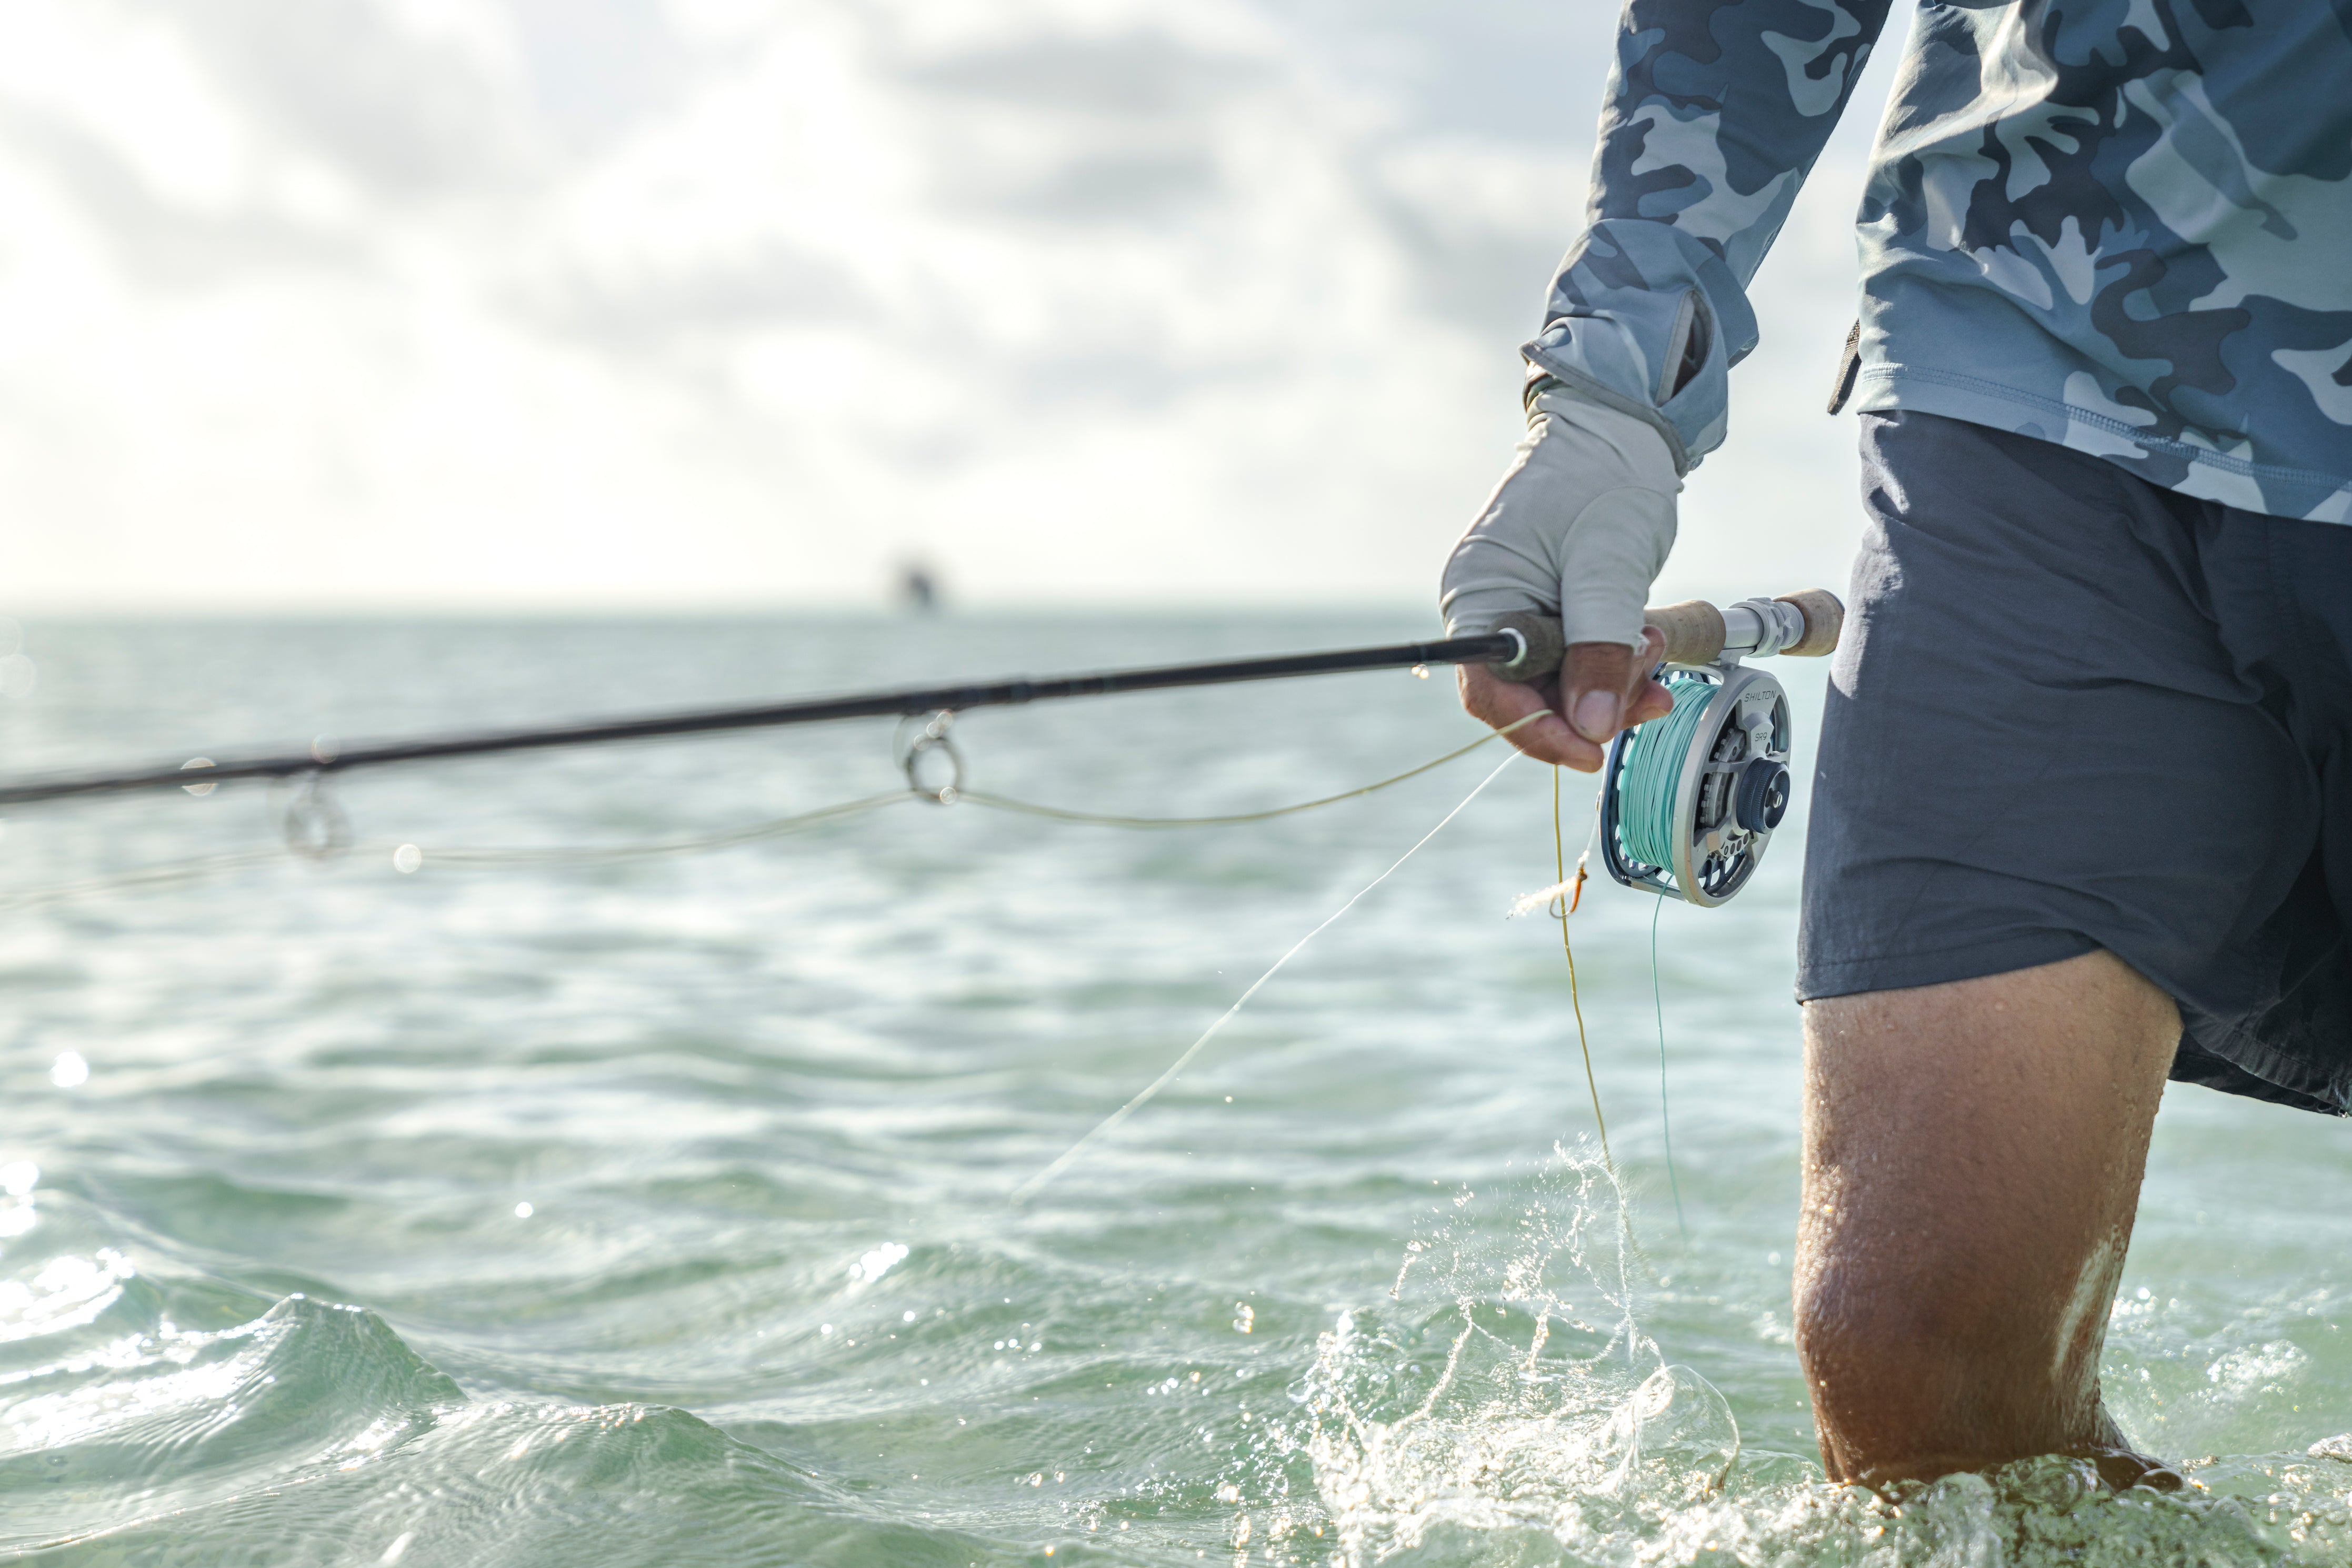 Fly Fishing - Saltwater Leader & Tippet